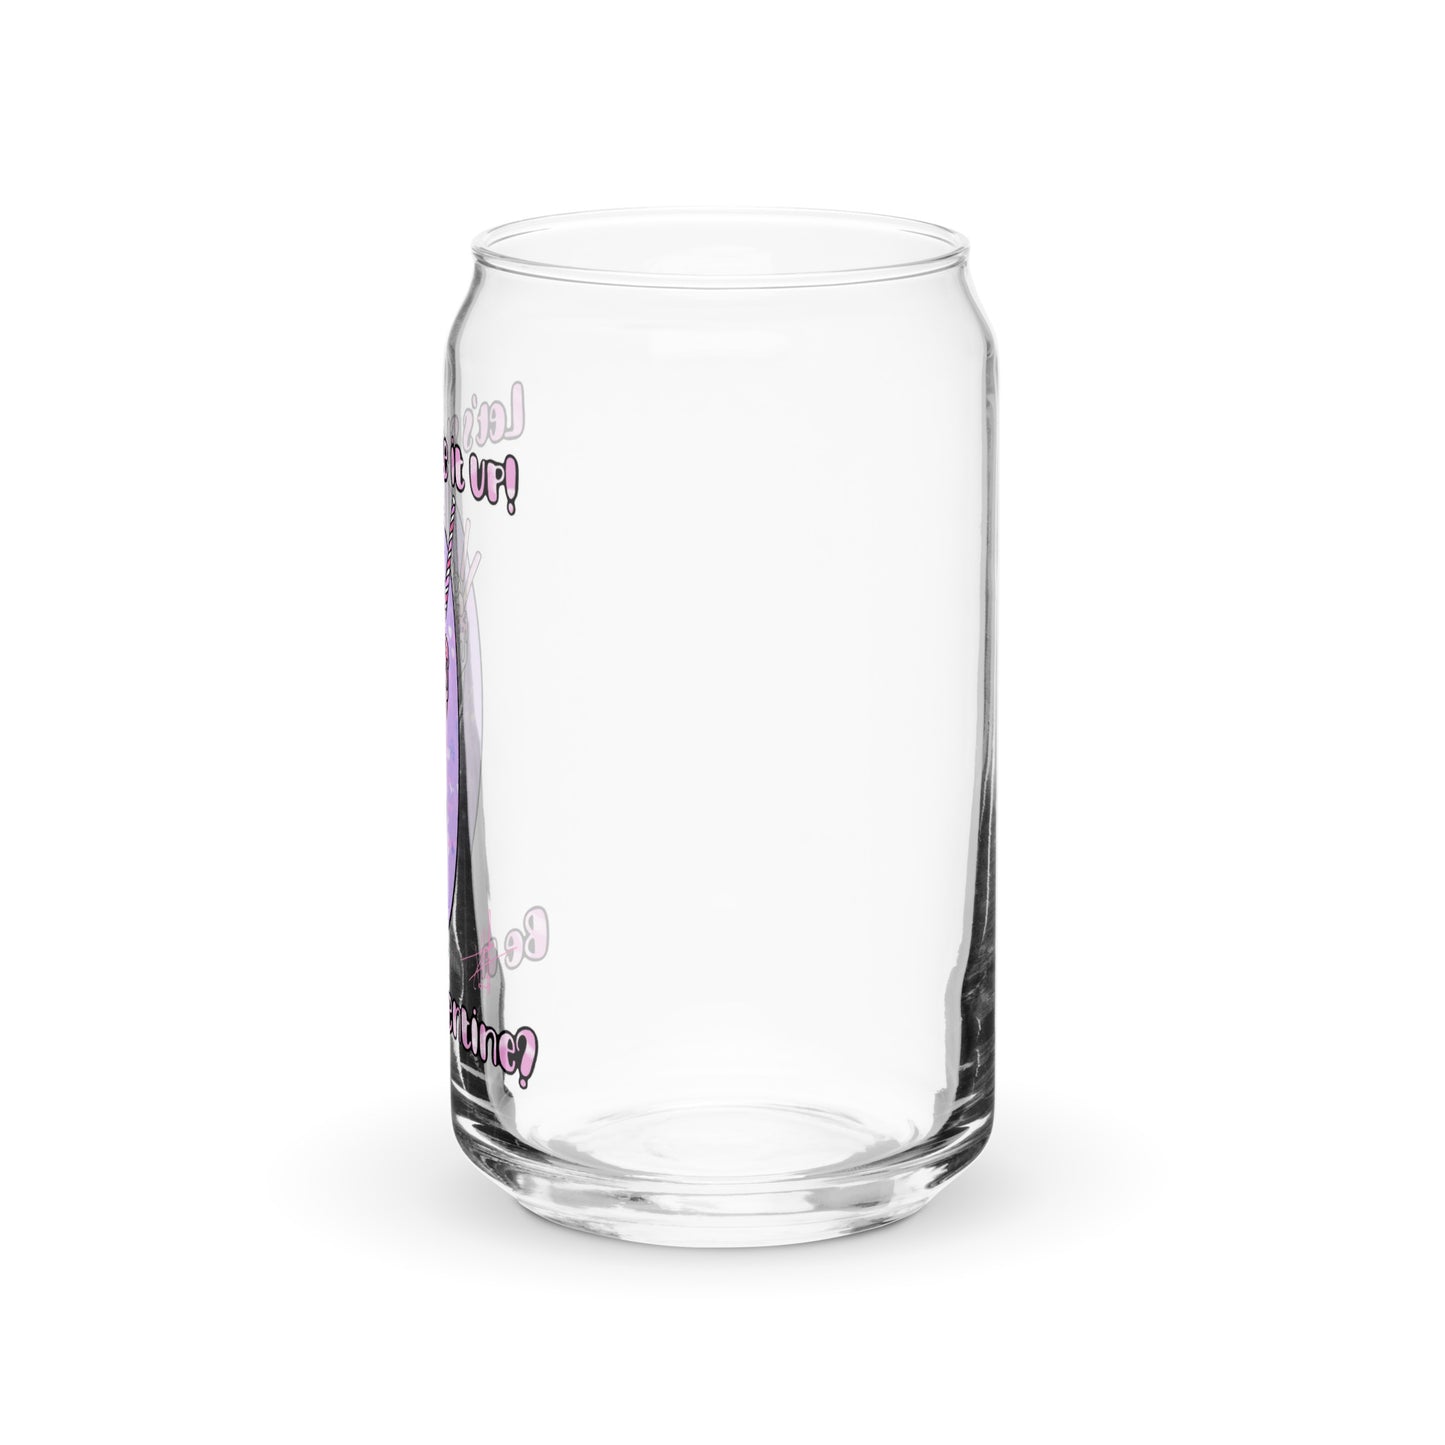 Shake It Up Can-shaped glass